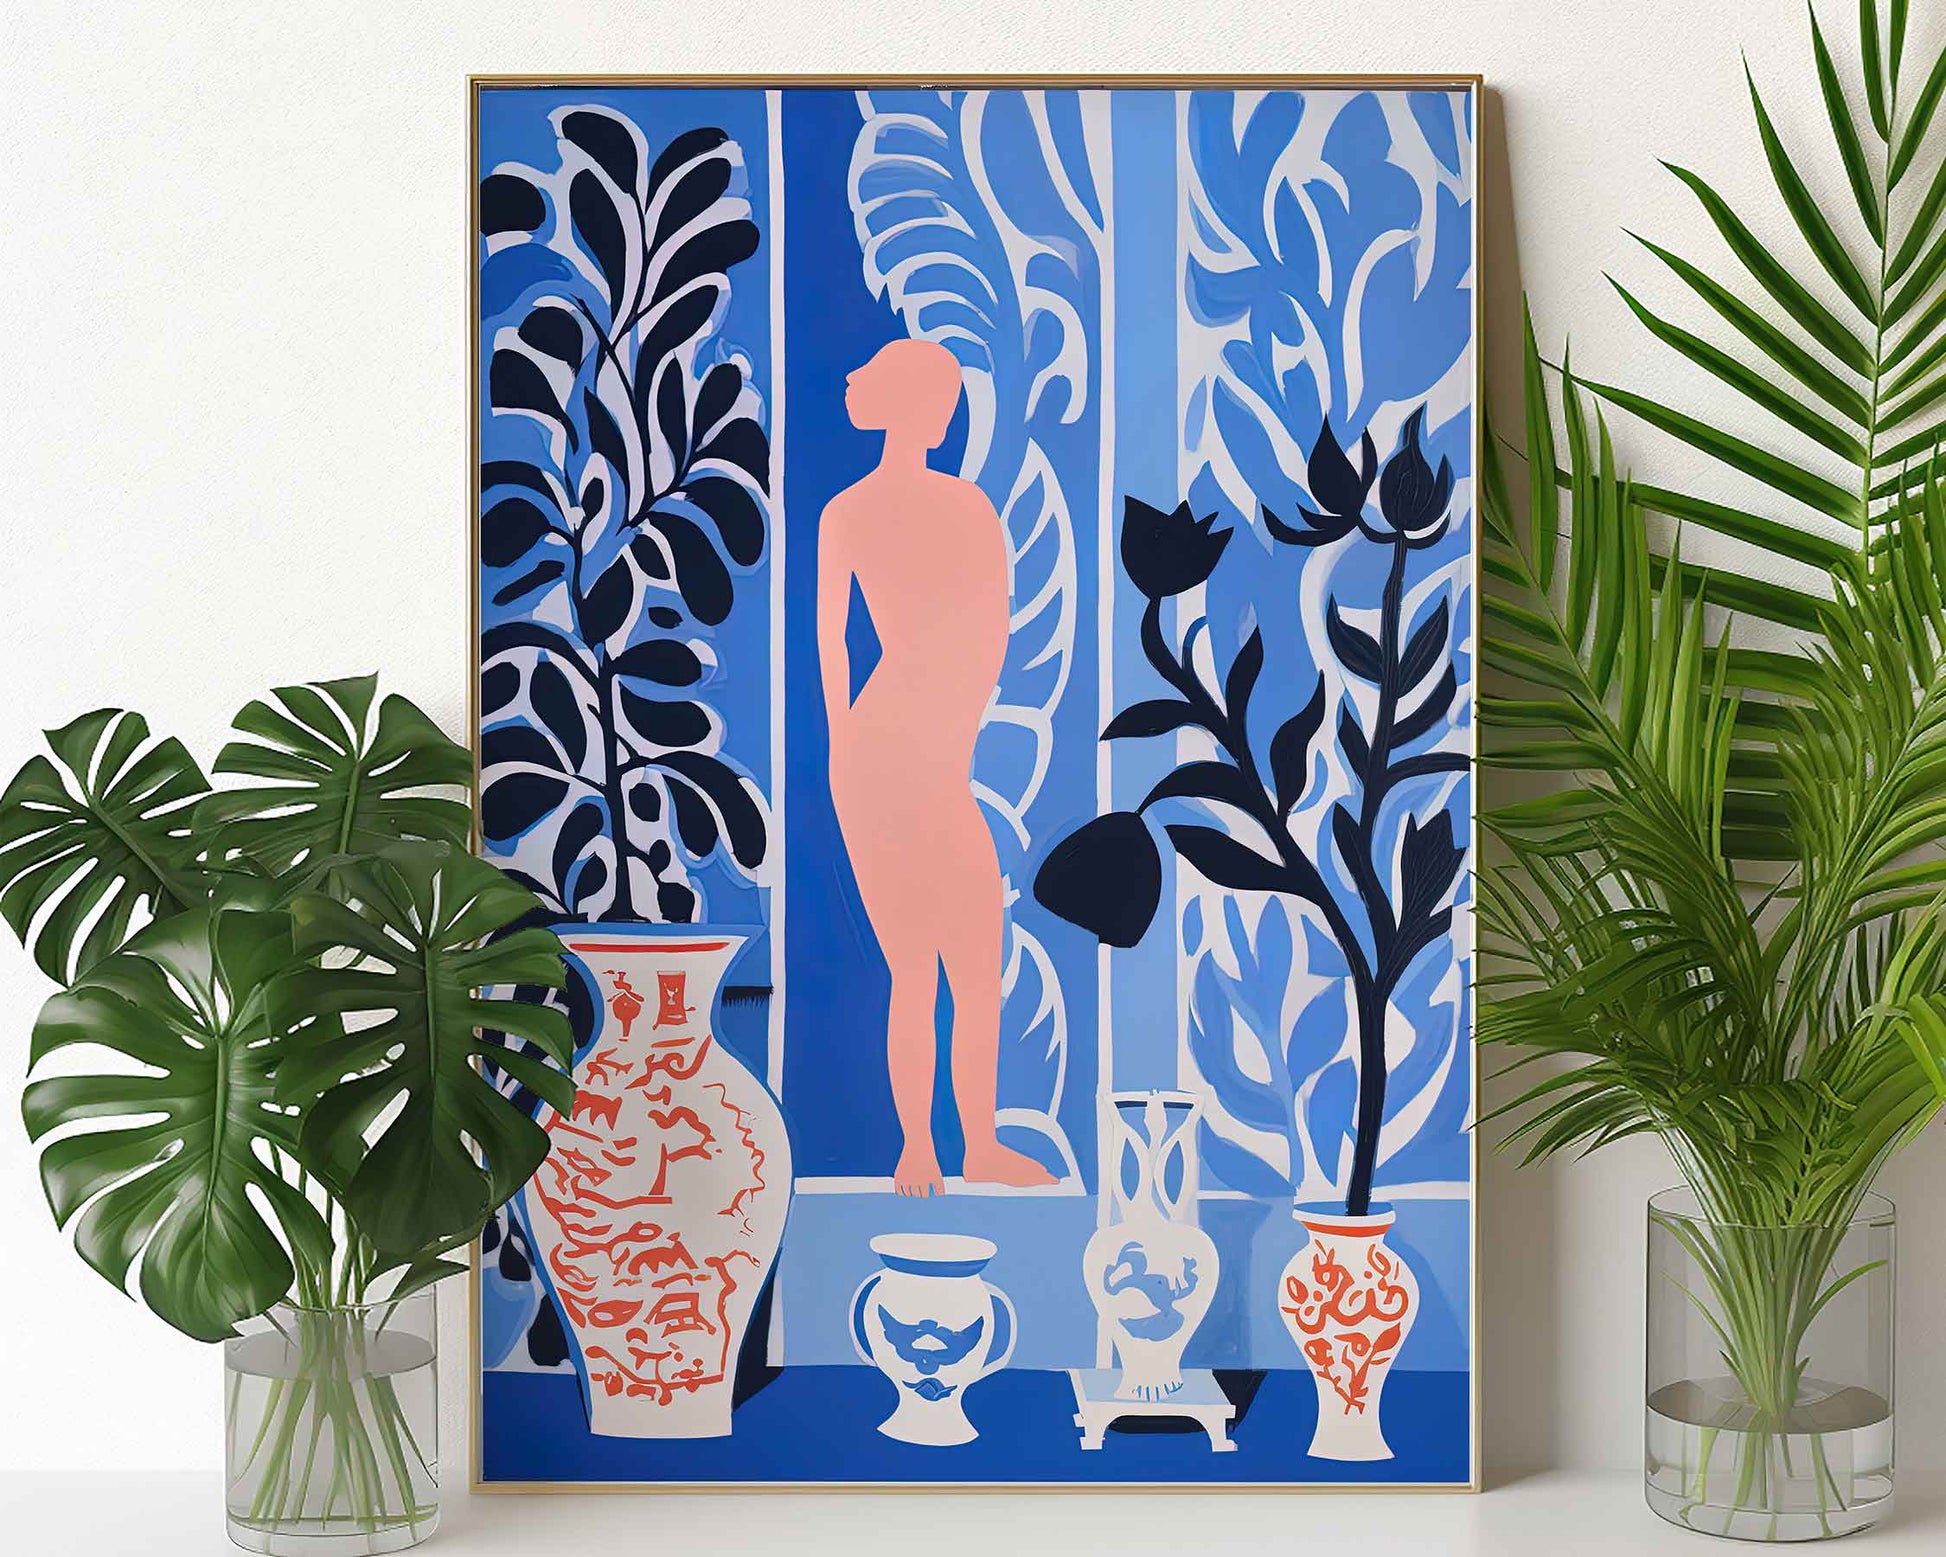 Framed Image of Matisse Art Poster Style Wall Print Blue Themed Oil Paintings